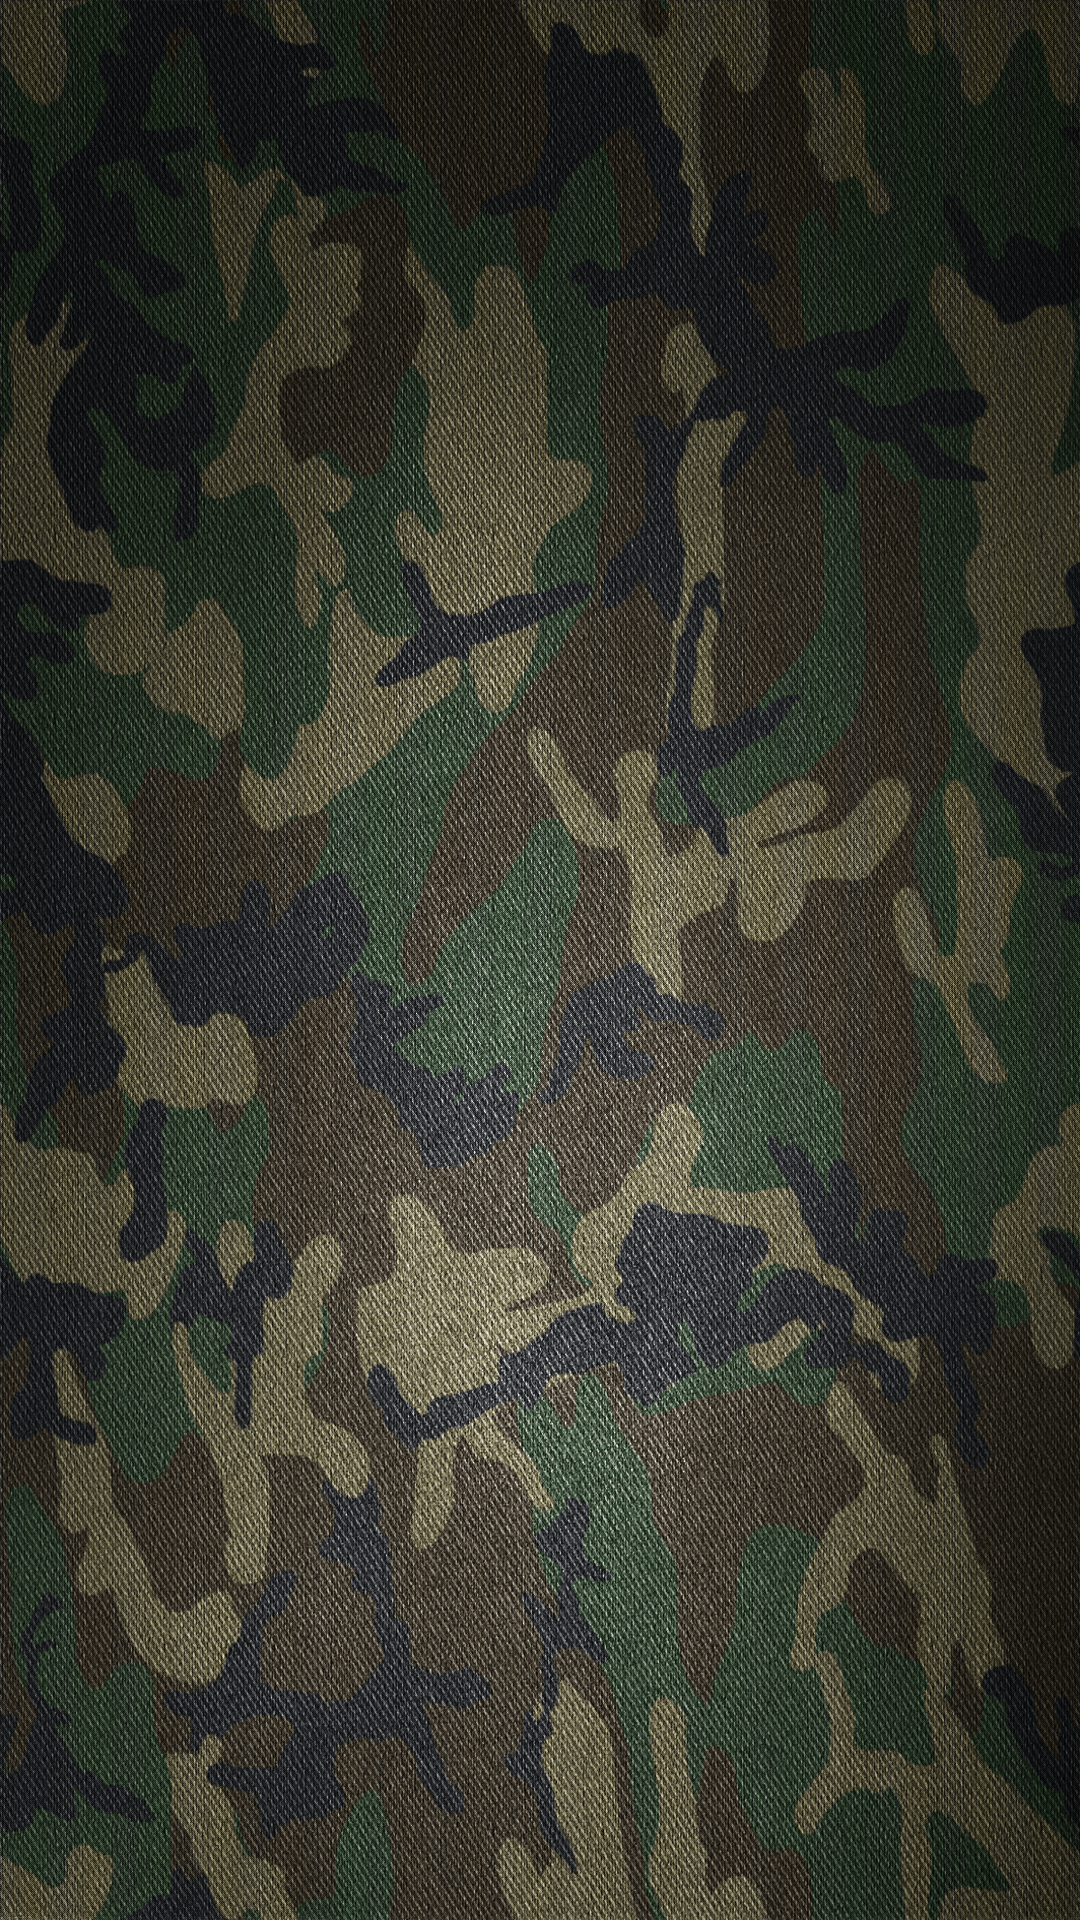 Military Camouflage Phone Wallpapers - Top Free Military Camouflage ...